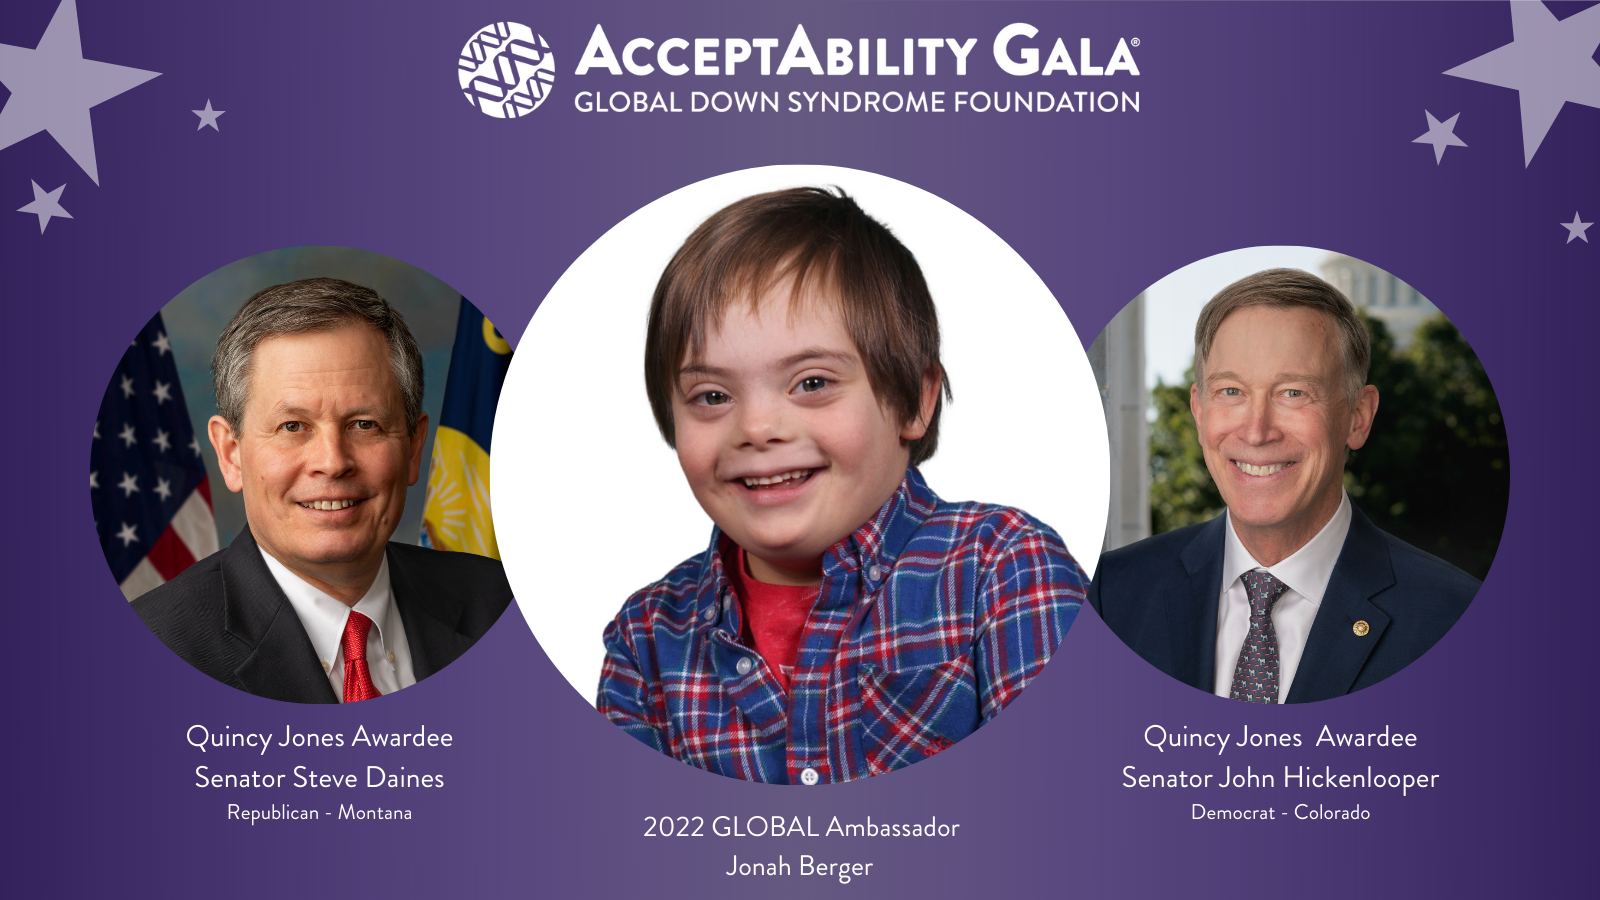 AcceptAbility Gala to Raise Critical Funds and Awareness for Life-Changing Research and Medical Care for People With Down Syndrome